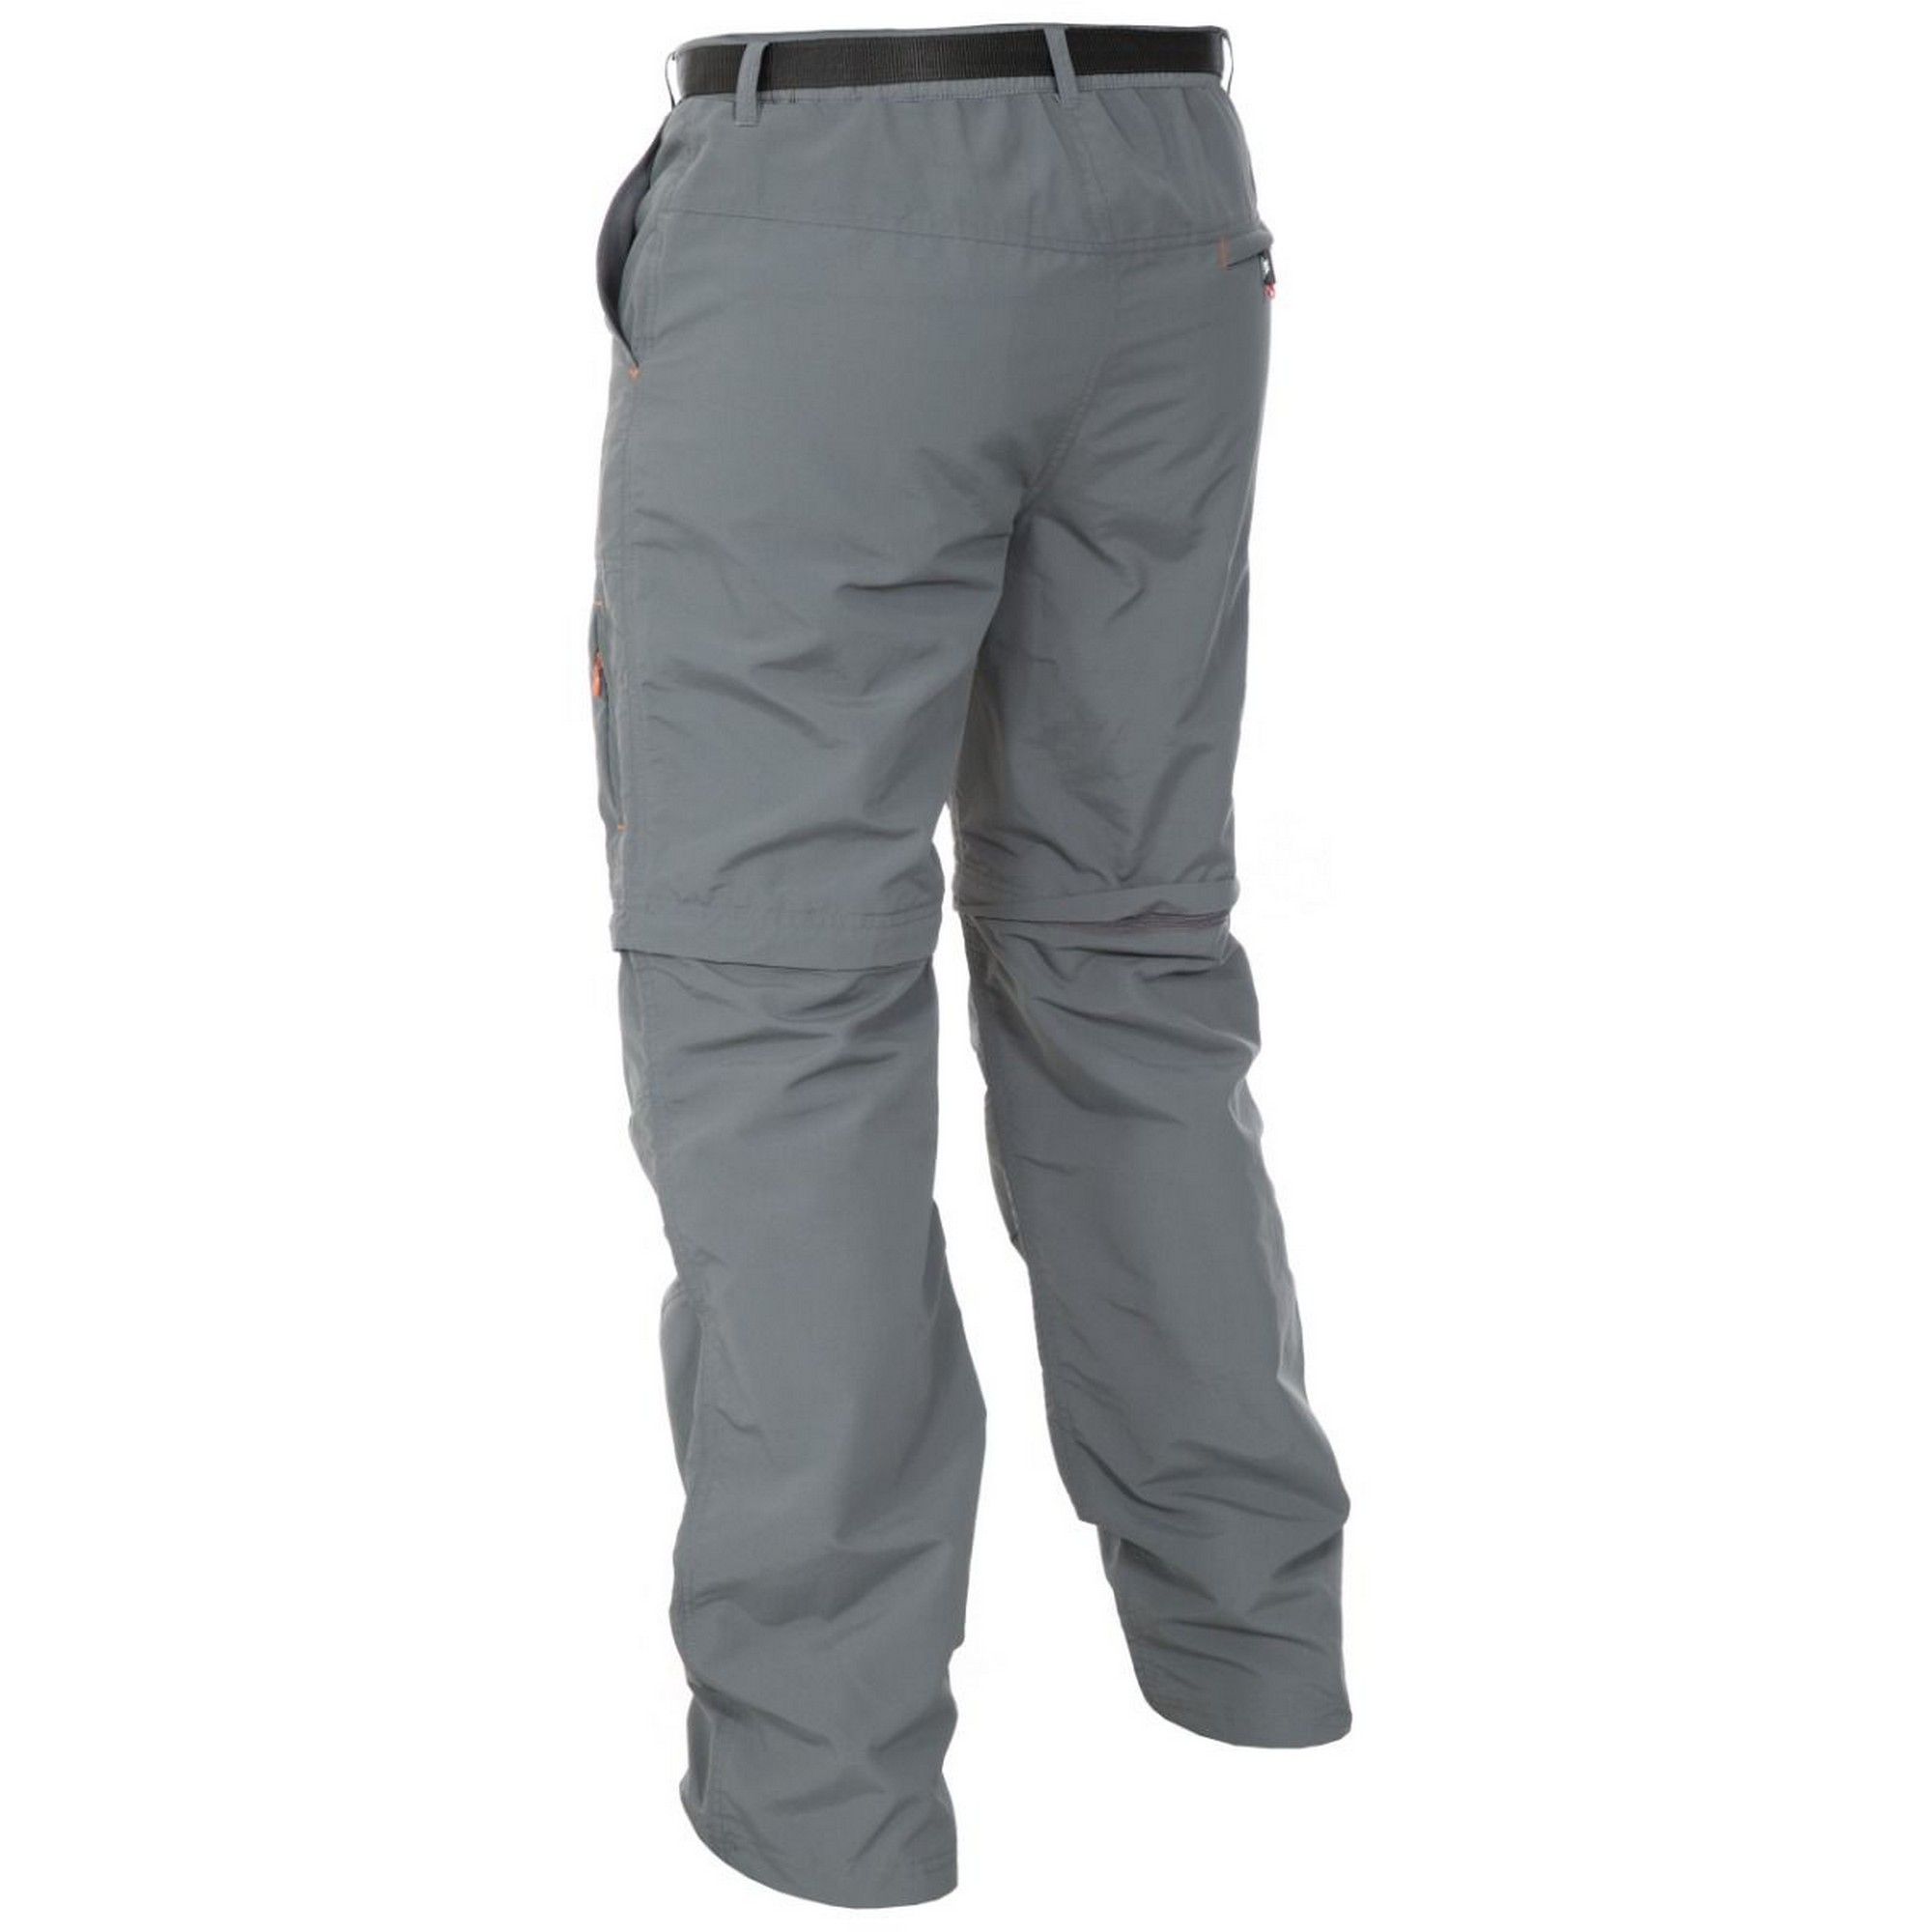 Trespass Mens Rynne Mosquito Repellent Quick Dry Trousers/Pants with 